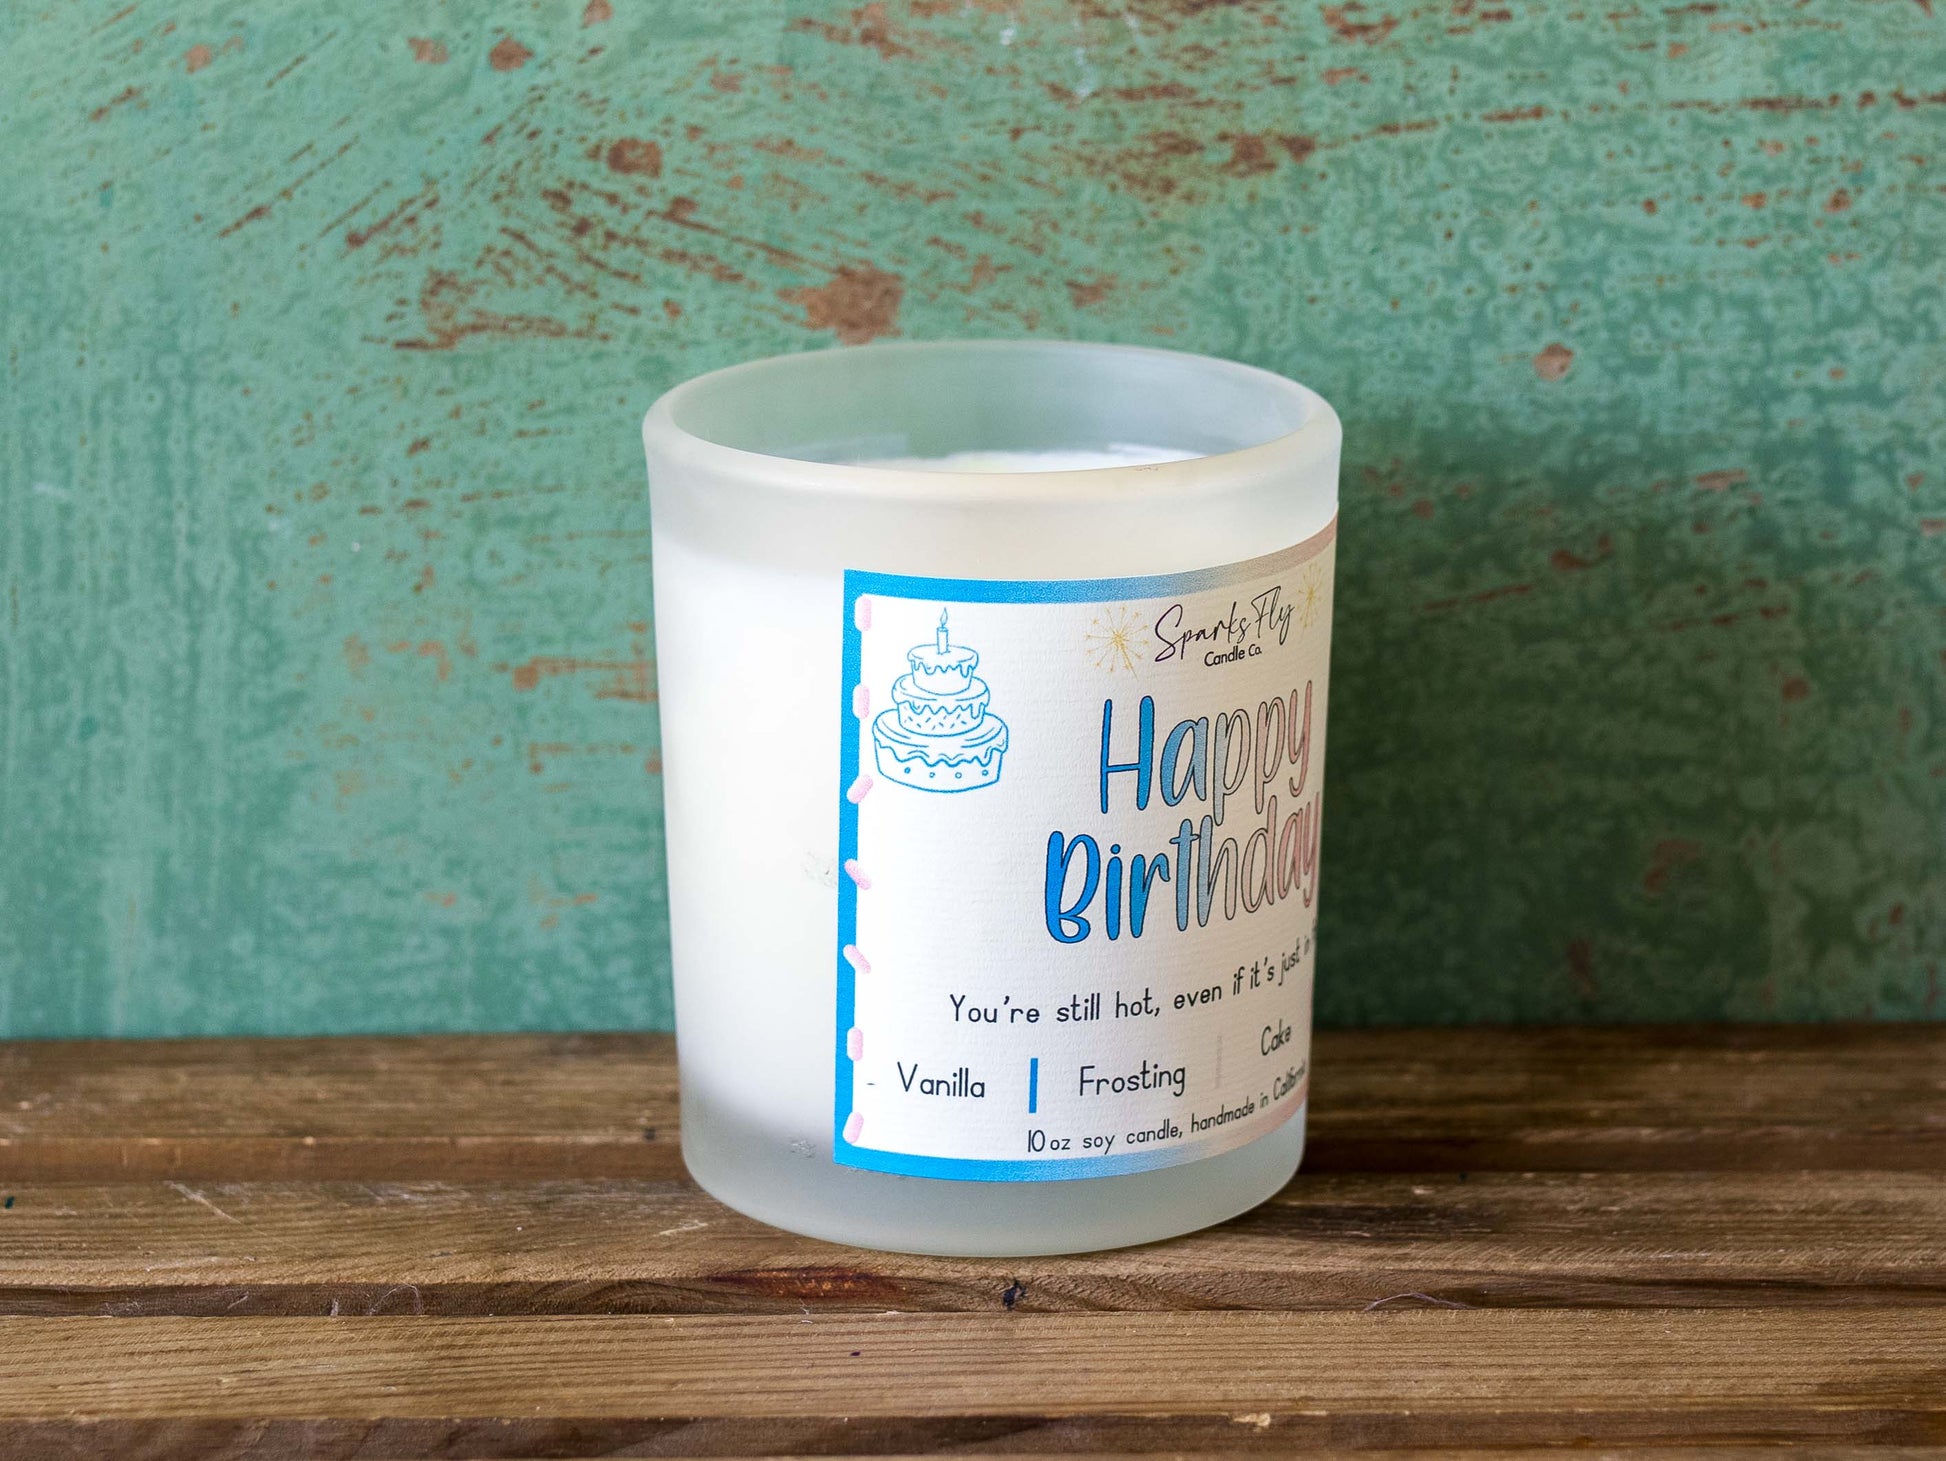 Happy Birthday Candle - Celebrating the sizzling moments, one hot flash at a time.